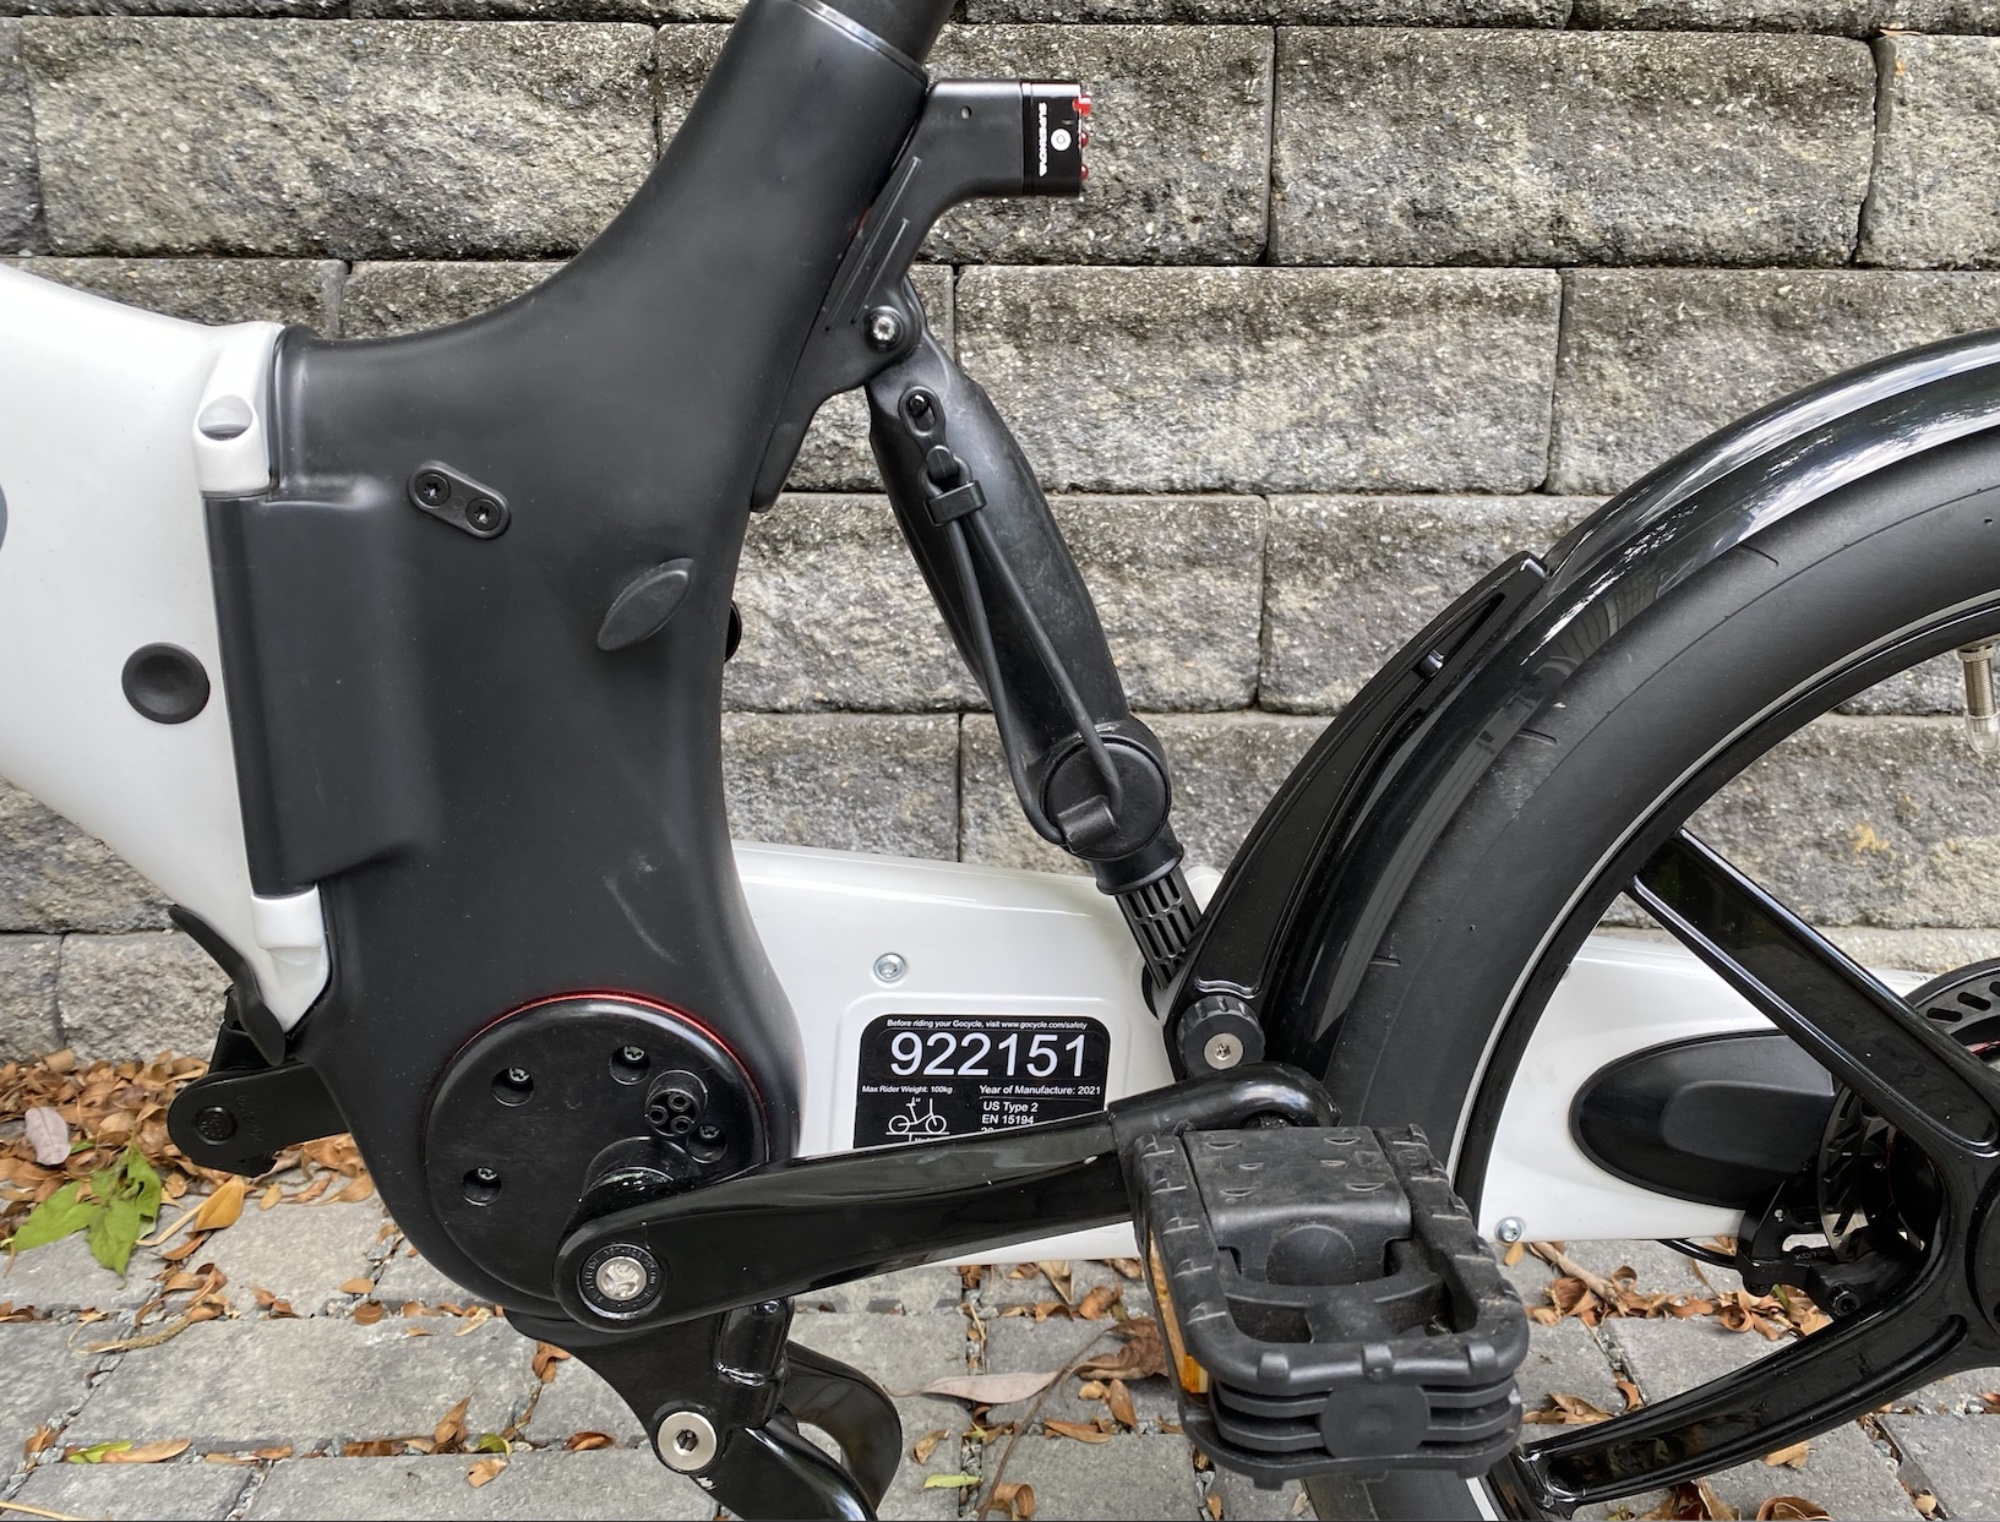 A close-up of the rear suspension.  Note the elastic strap it's attached to—when the bike is folded, it clips onto a hook on the handlebars to keep it folded.  Also note the black plastic handle on the left, which can be turned to release the seat post for storage.